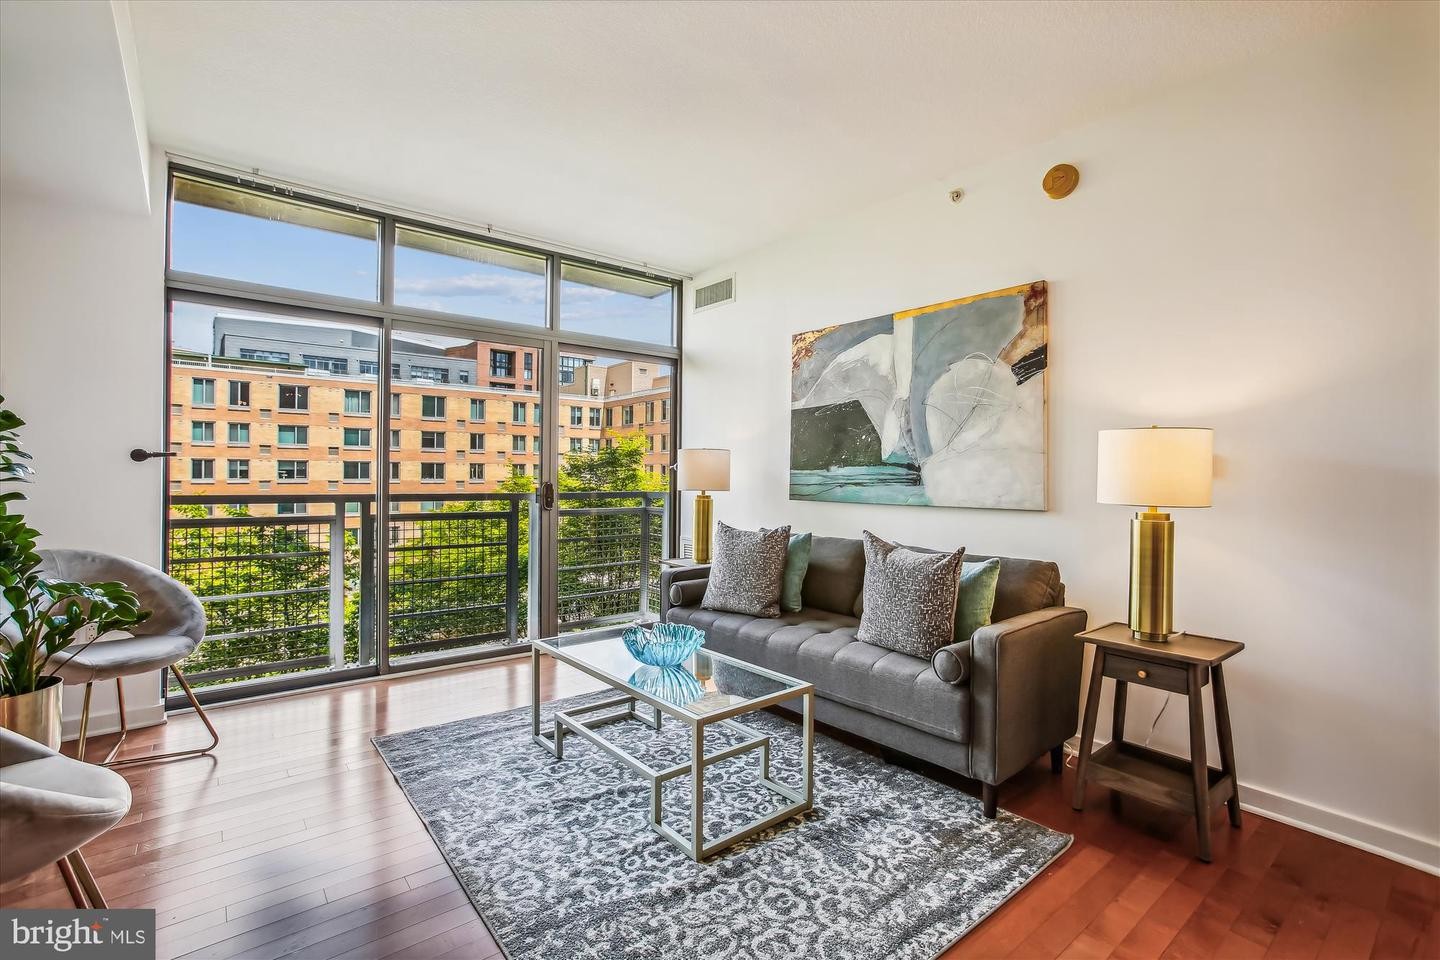 8. 475 K St NW 